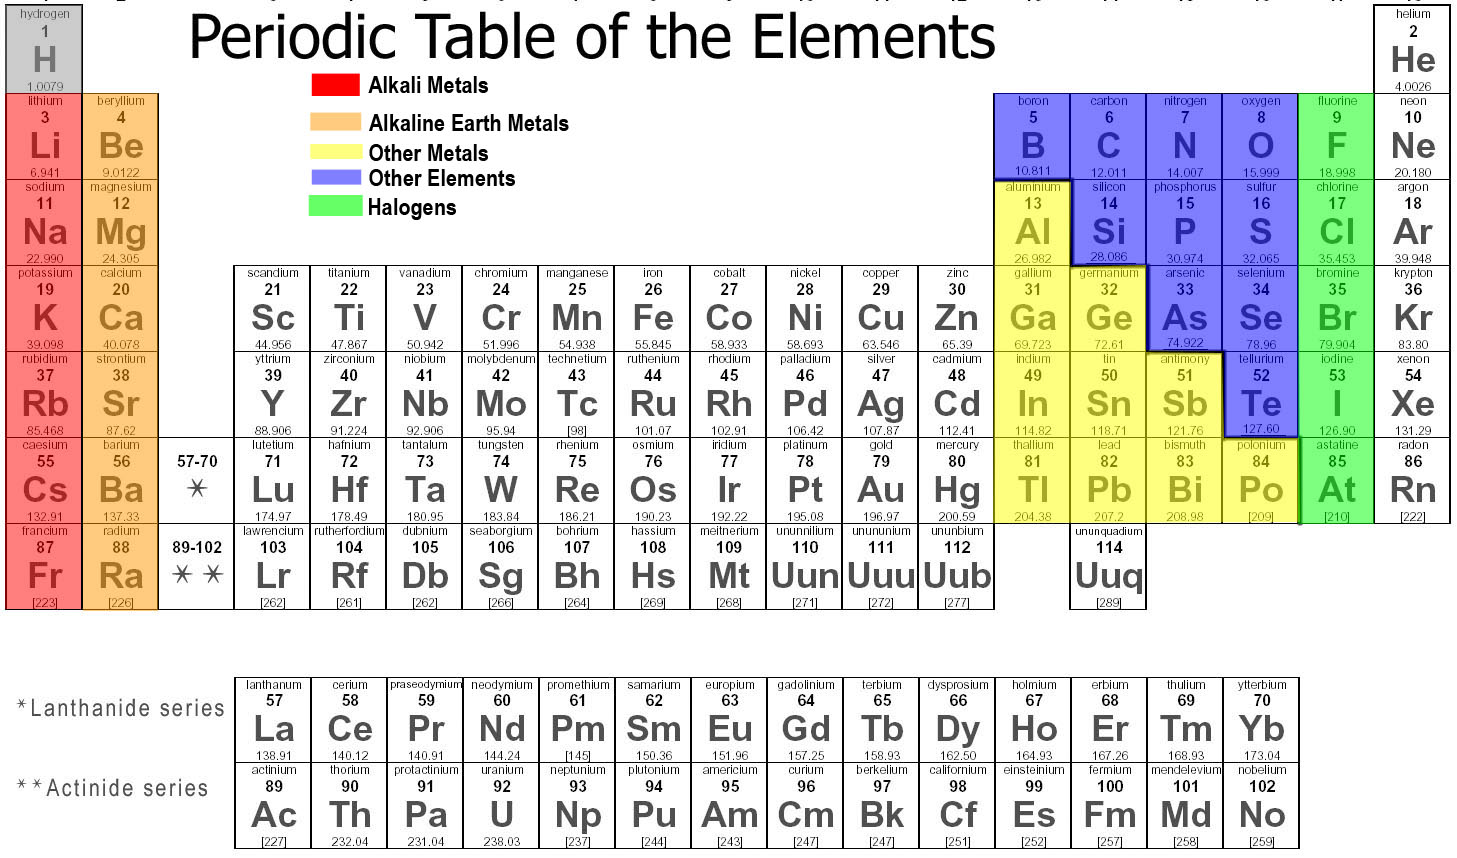 lrc-320-chemistry-101-the-periodic-table